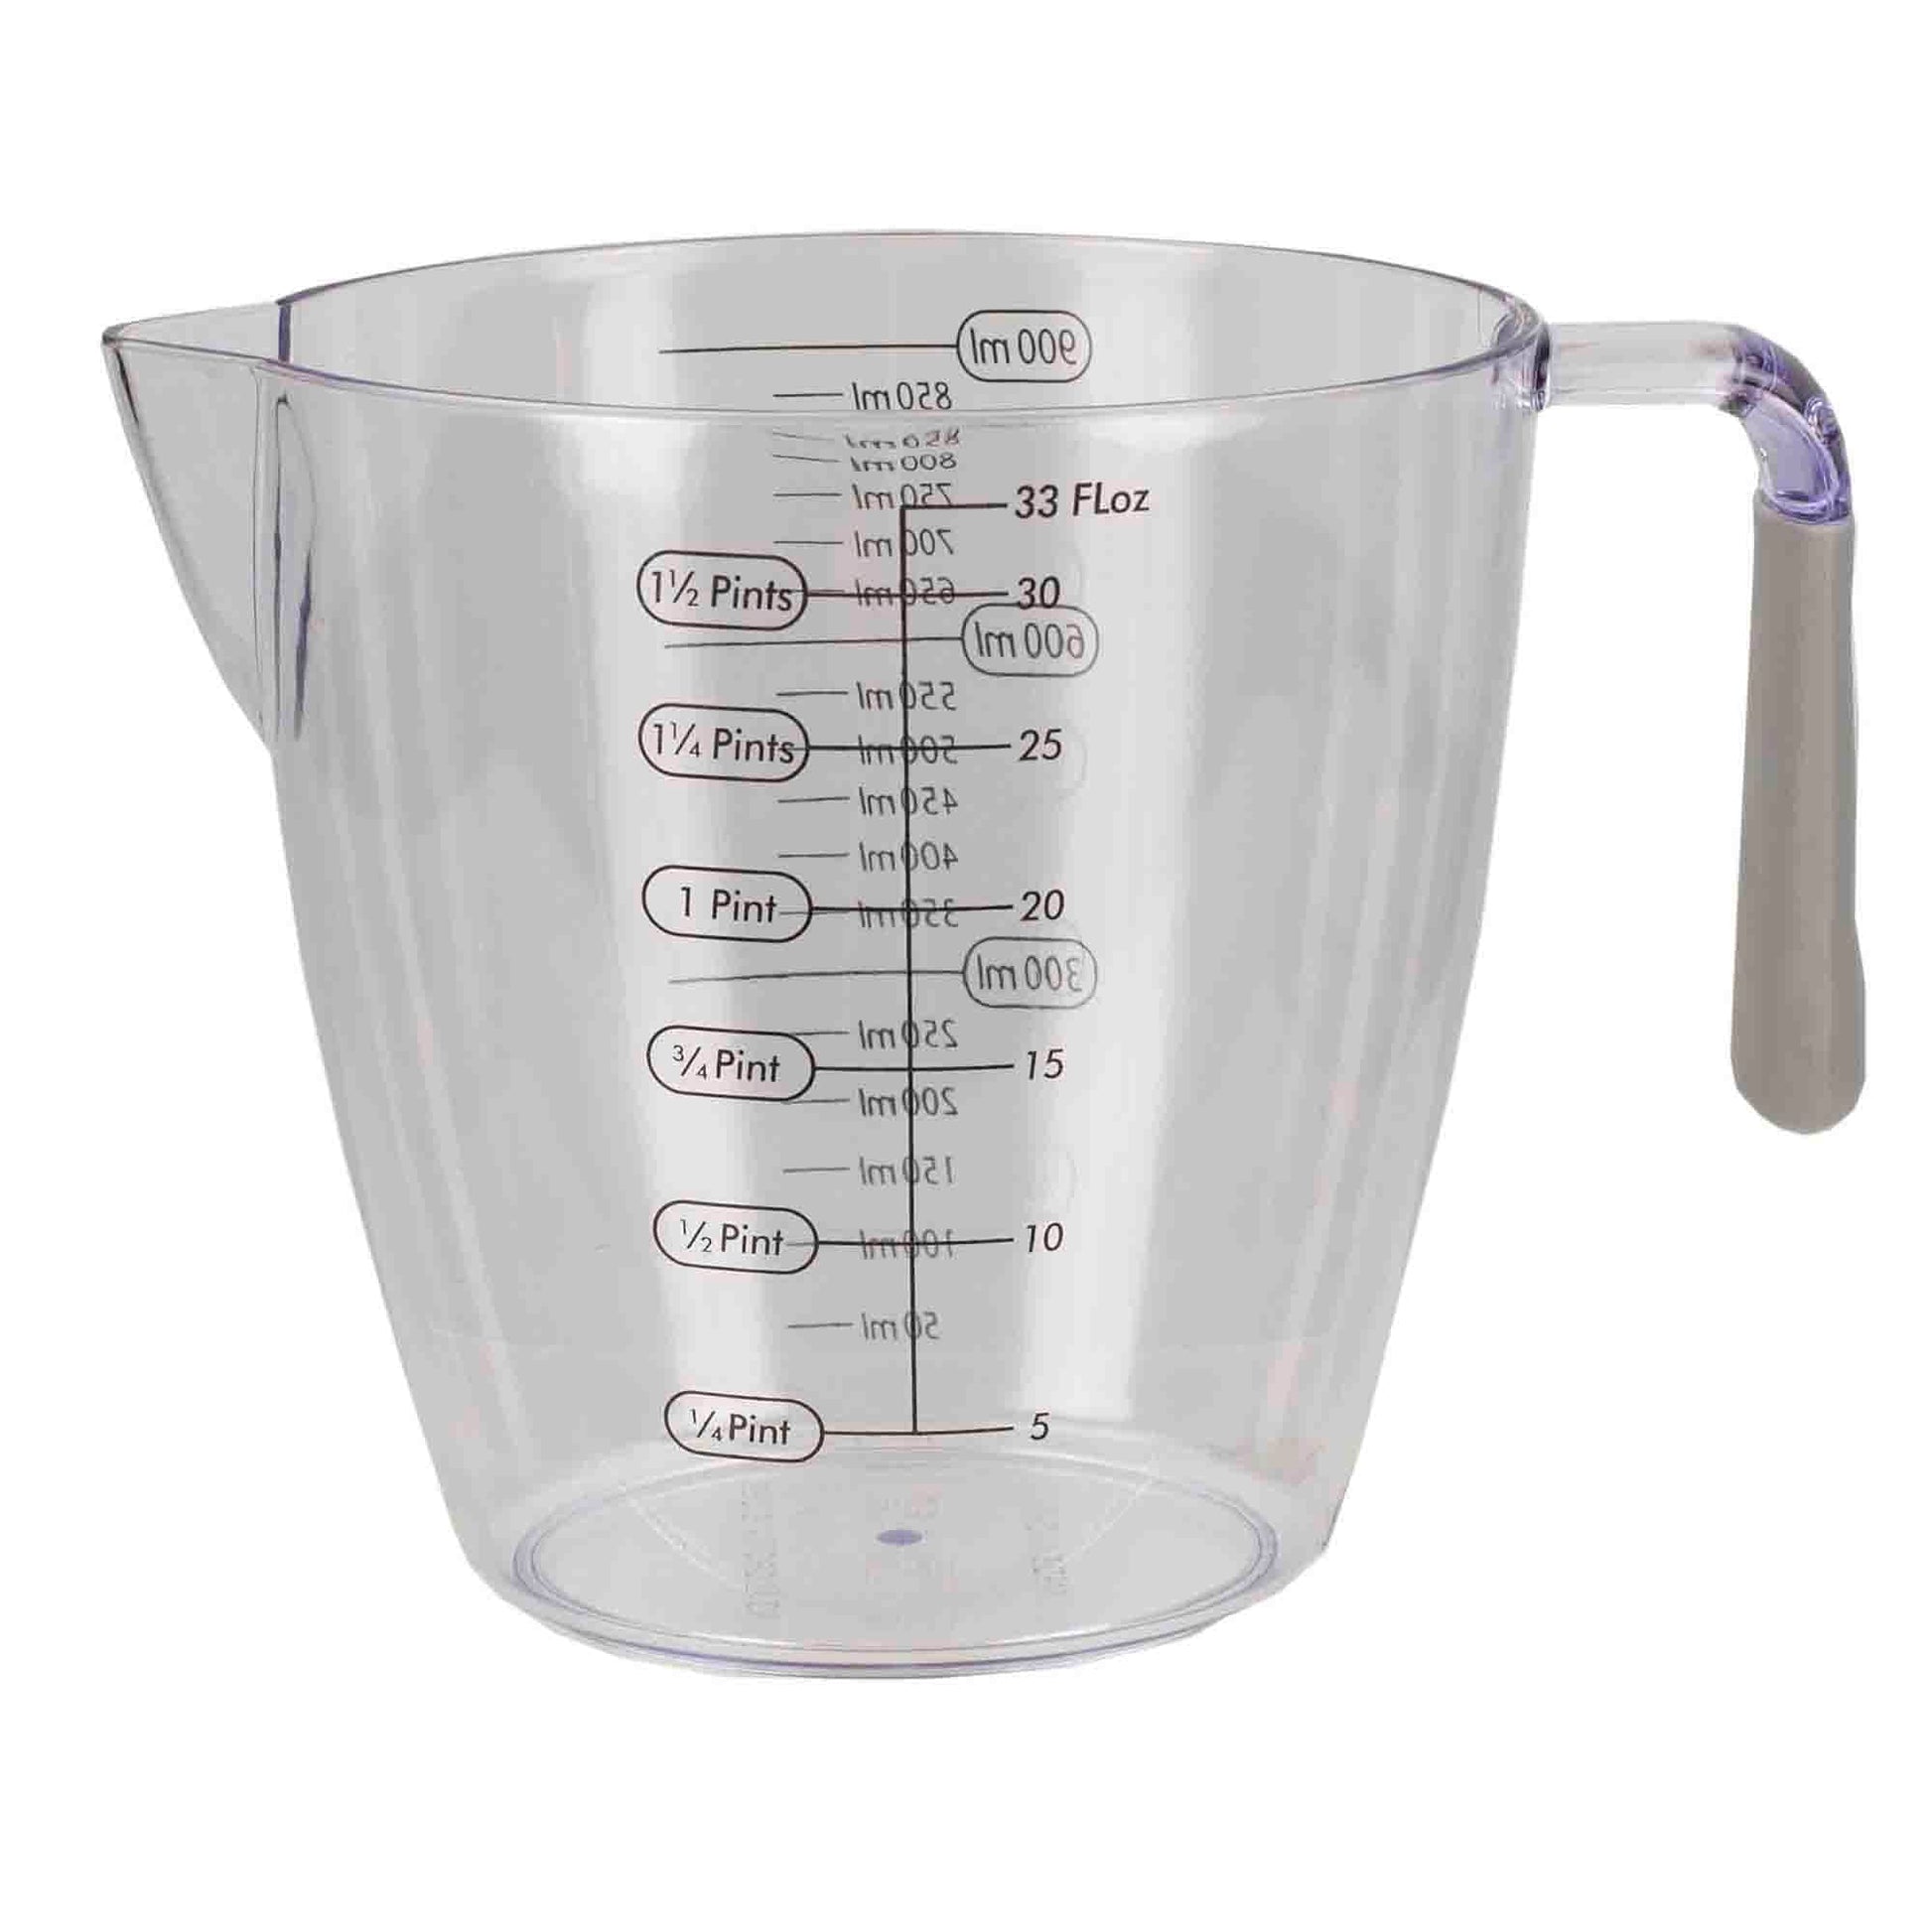 Task Bin 5: Measuring Cups and Visual Recipes (Ships to You